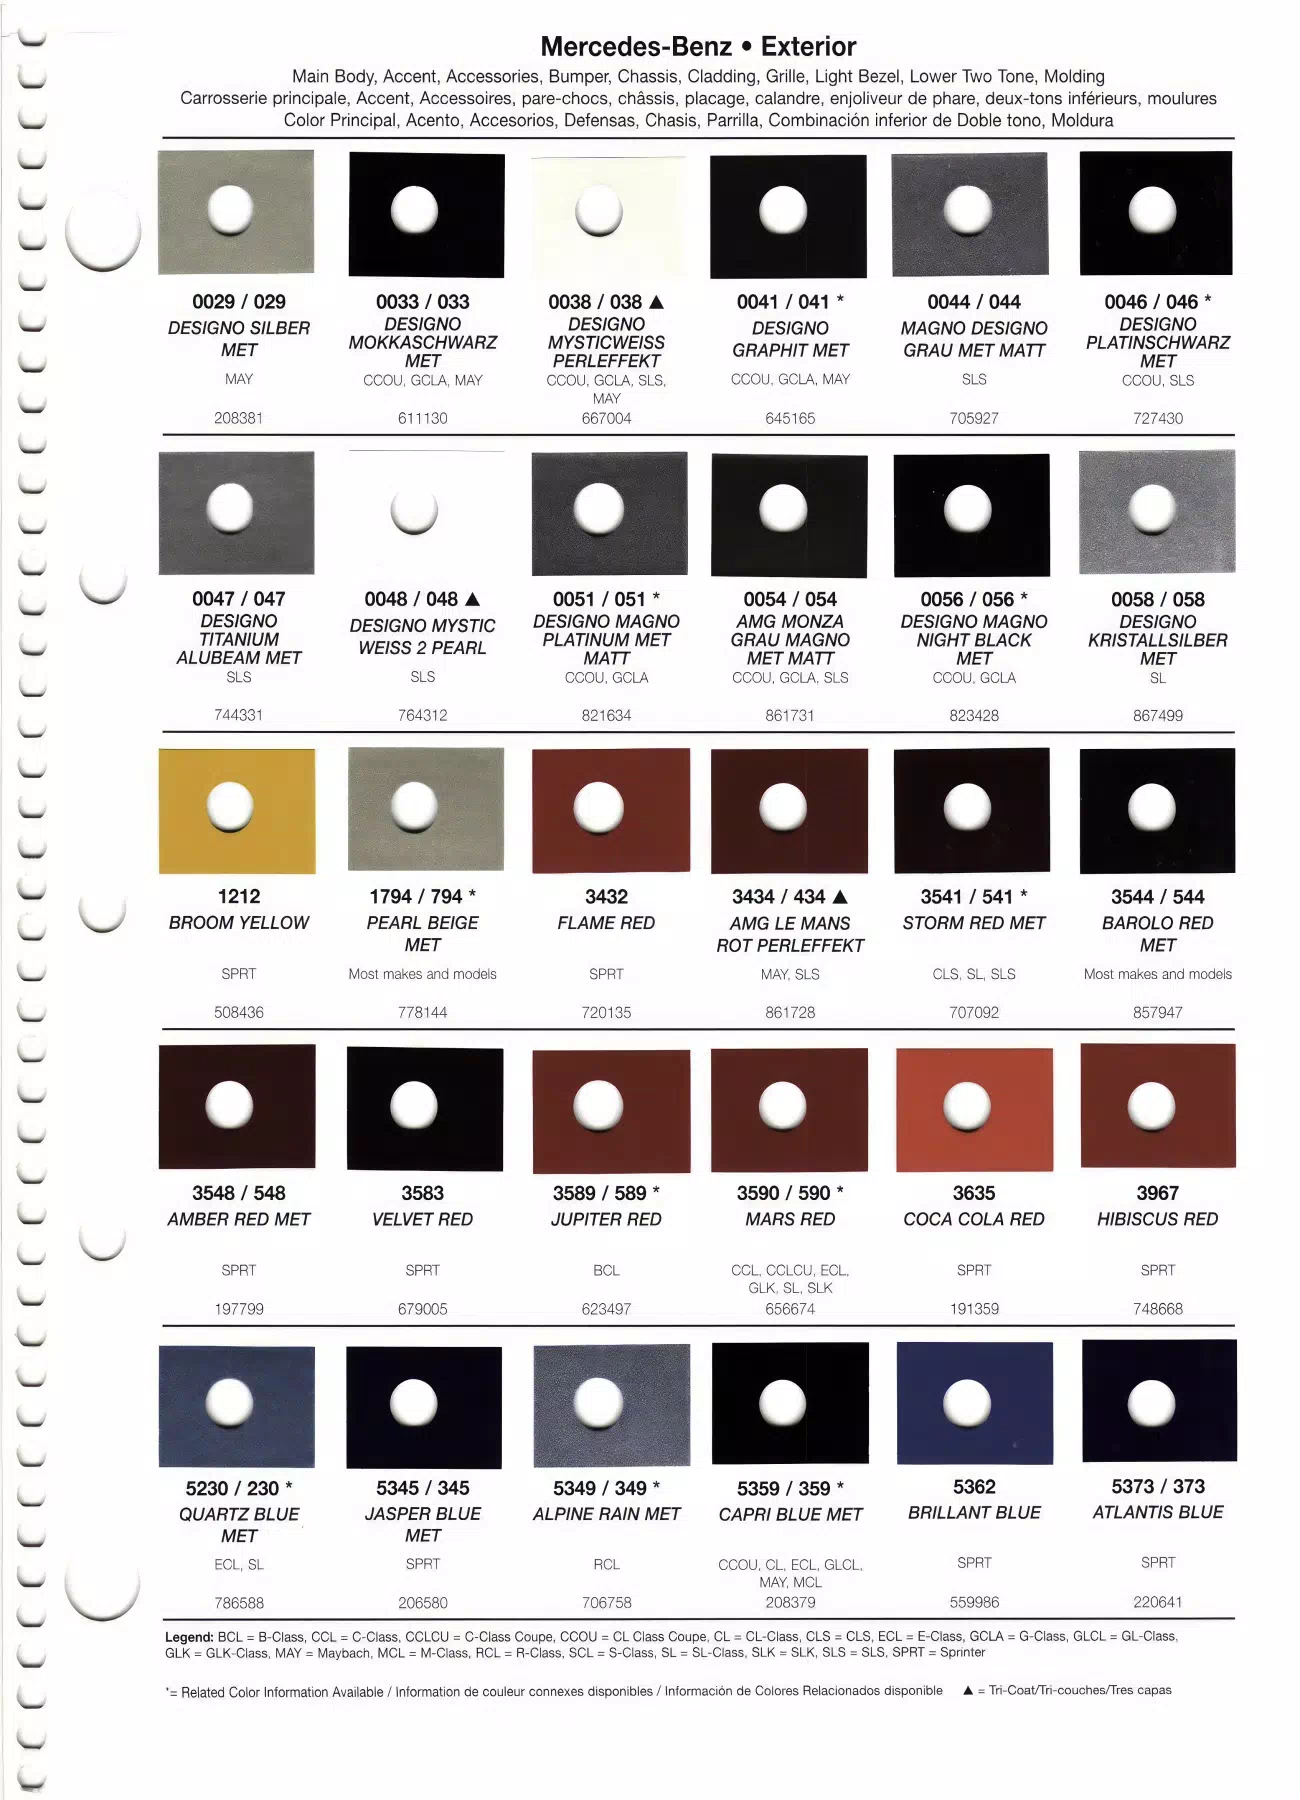 2012 Mercedes Benz exterior Color Swatches, Color names, Color Codes and ordering paint codes for all 2012 mercedes automobiles.